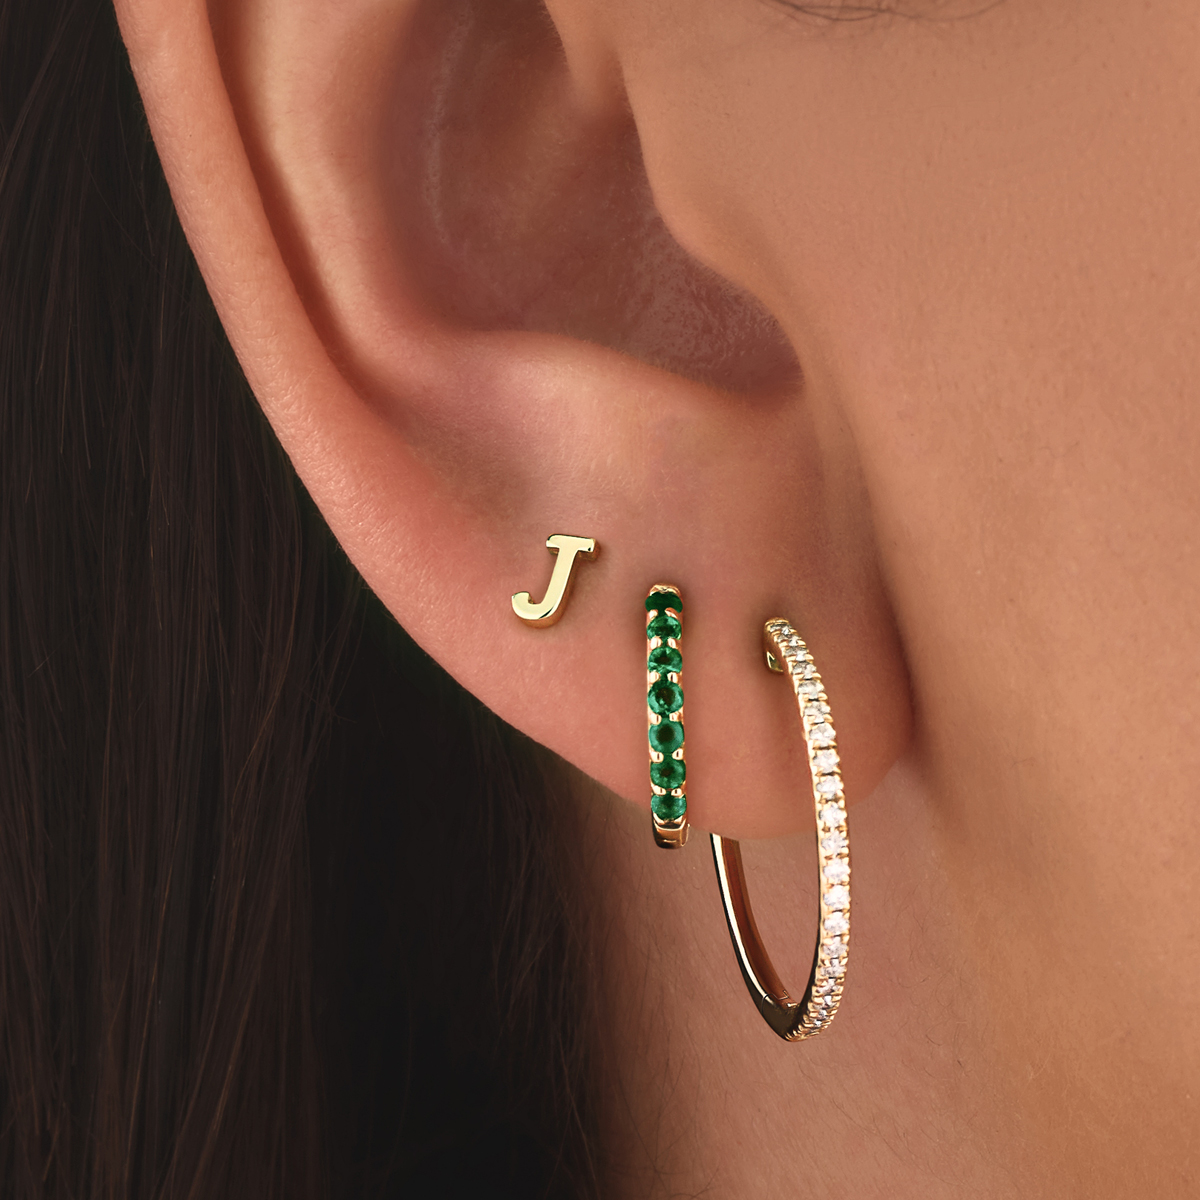 Diamond and emerald hoops stacked together with a J initial stud